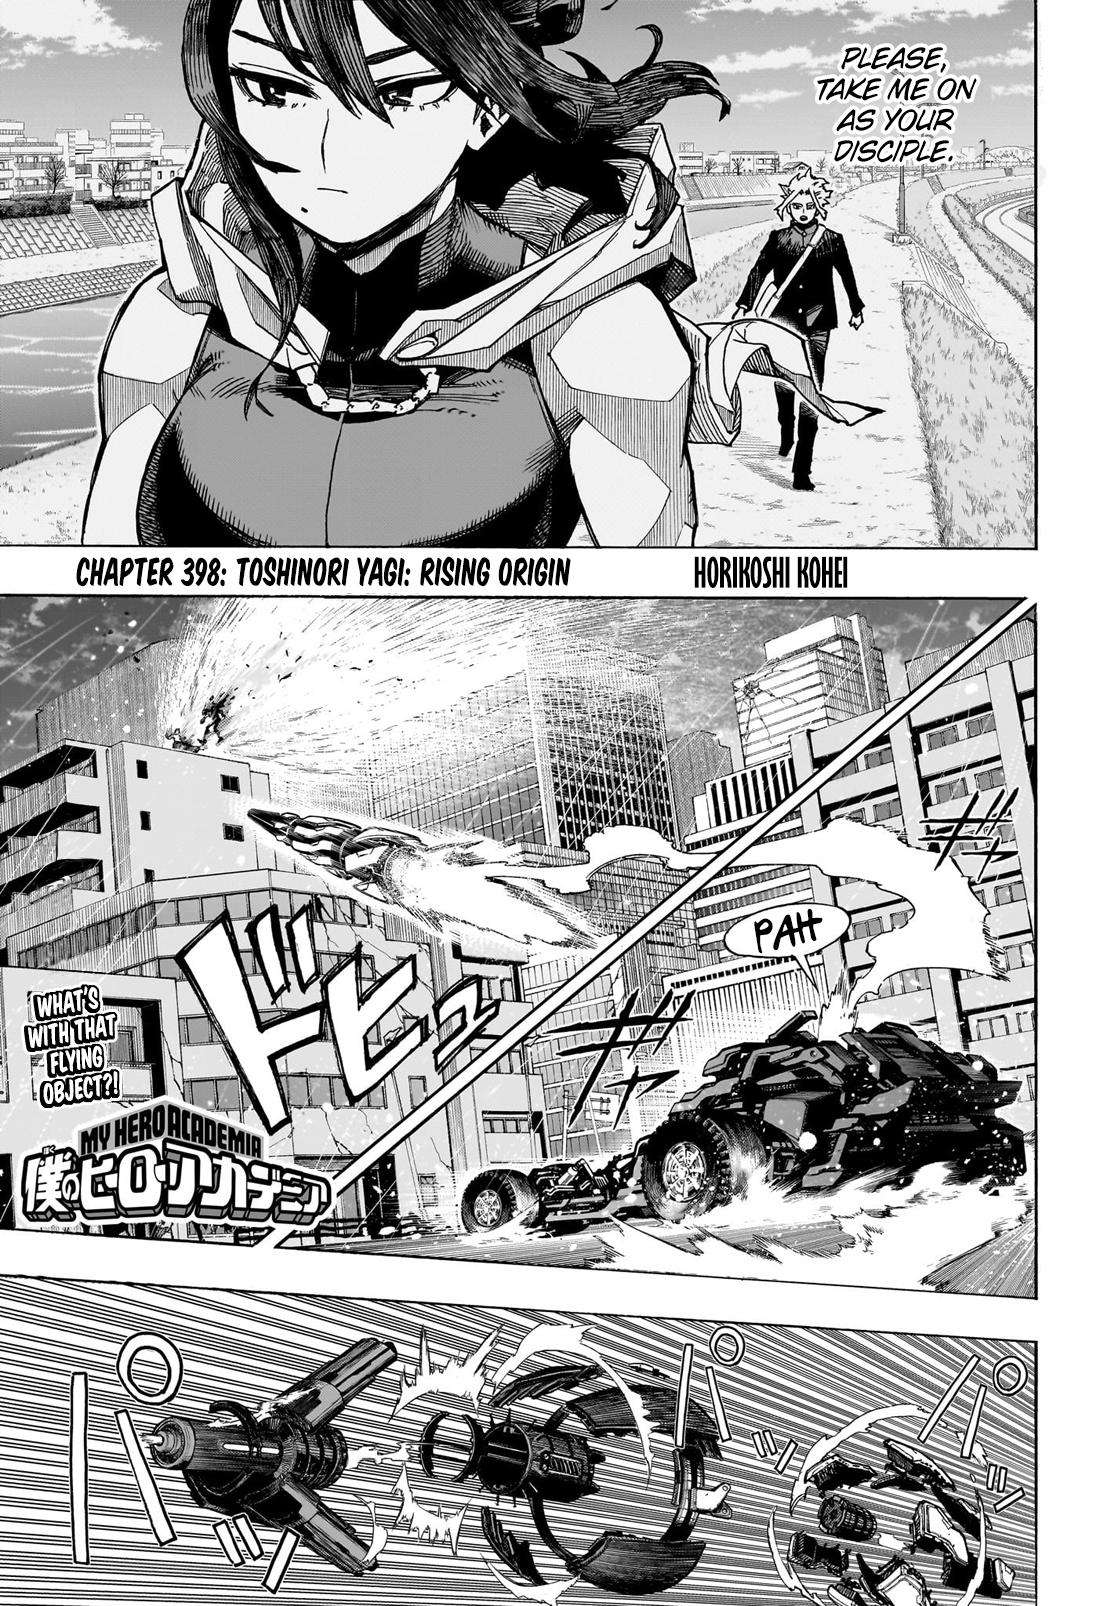 My Hero Academia Chapter 408 Preview - All For One's Secrets